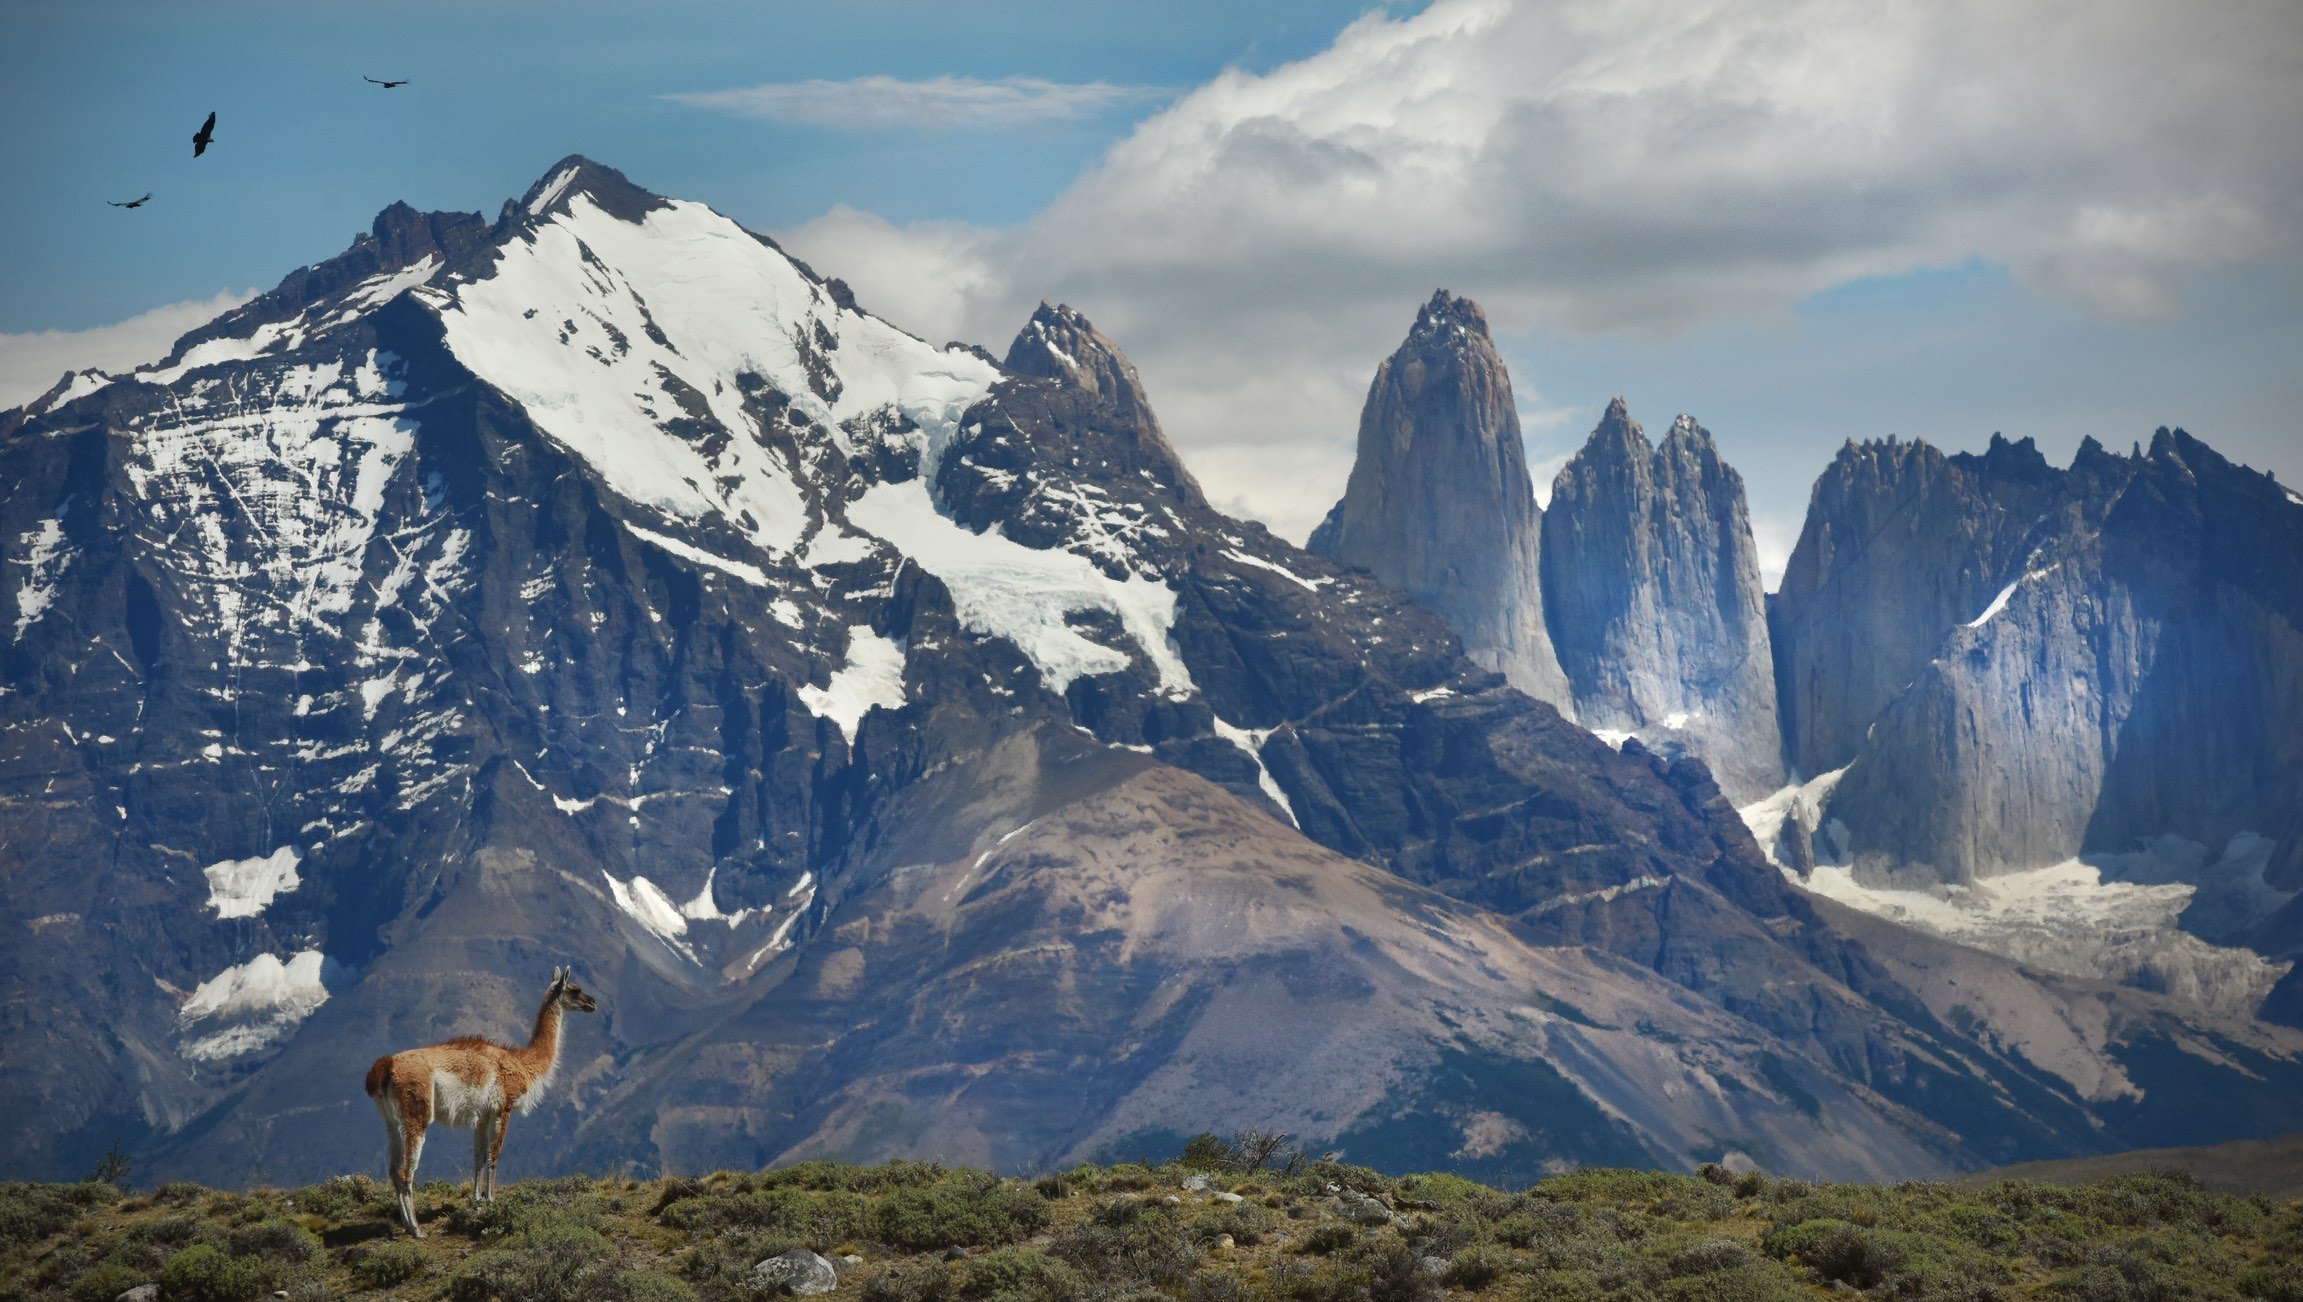 A guanaco (small llama) stands sentinel with condors overhead at Torres del Paine in Chile.